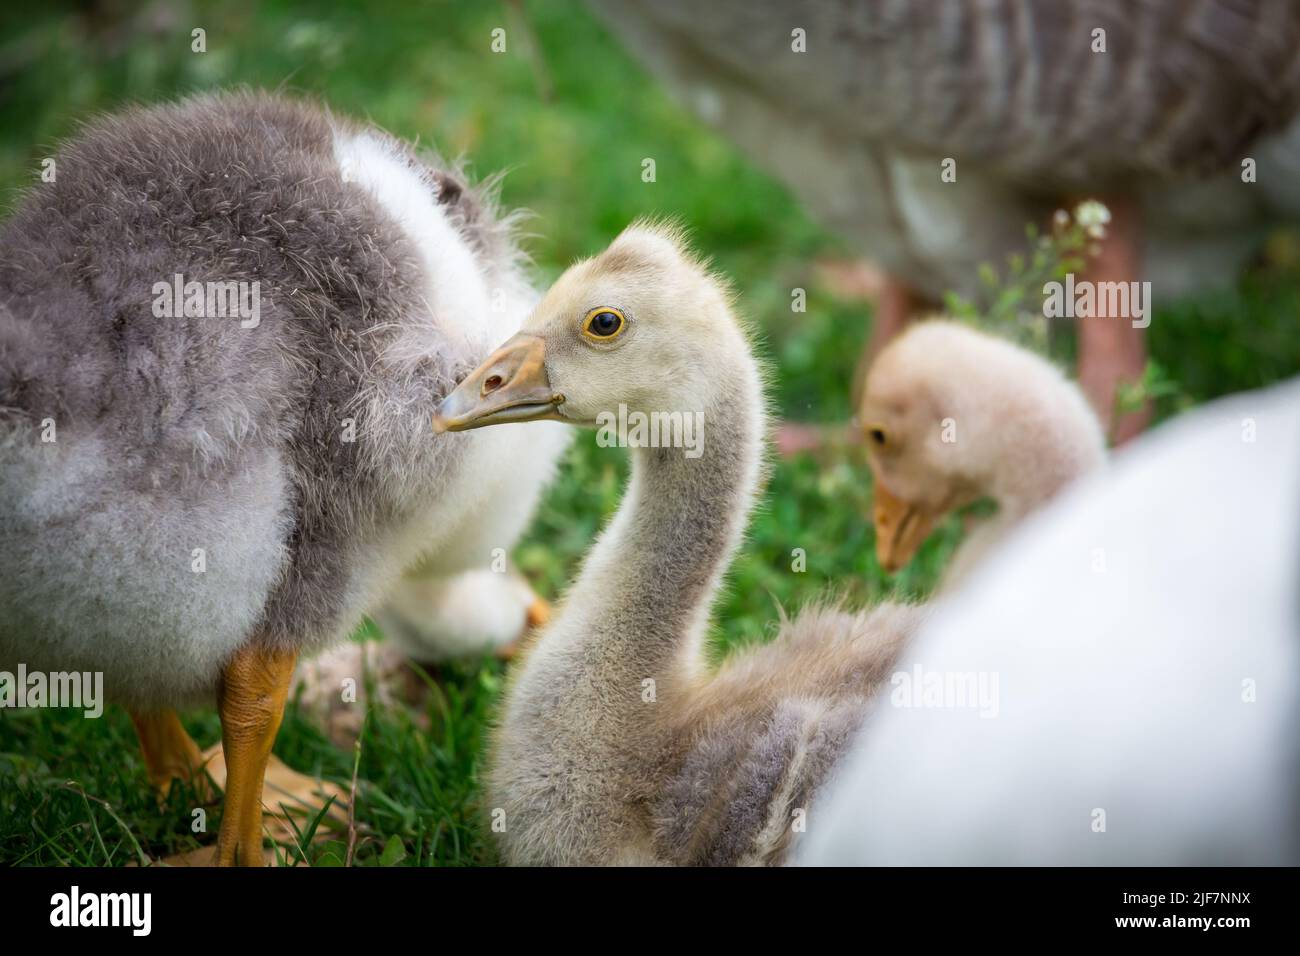 Goslings of the breed 'Österreichische Landgans', an endangered goose breed from Austria Stock Photo